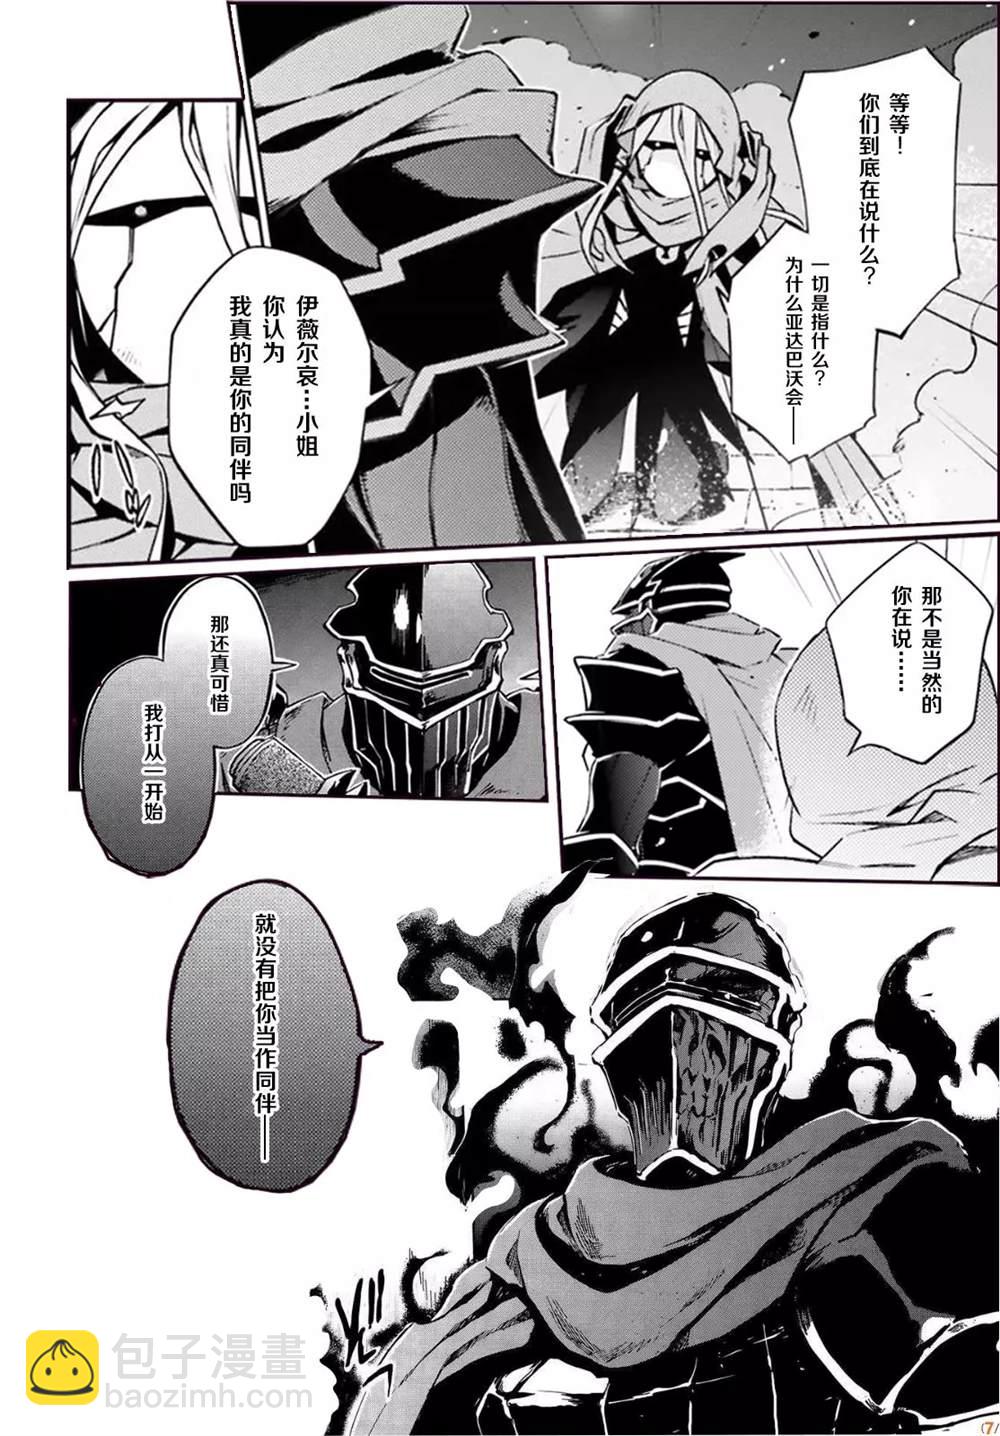 OVERLORD - 第51.5話 - 2